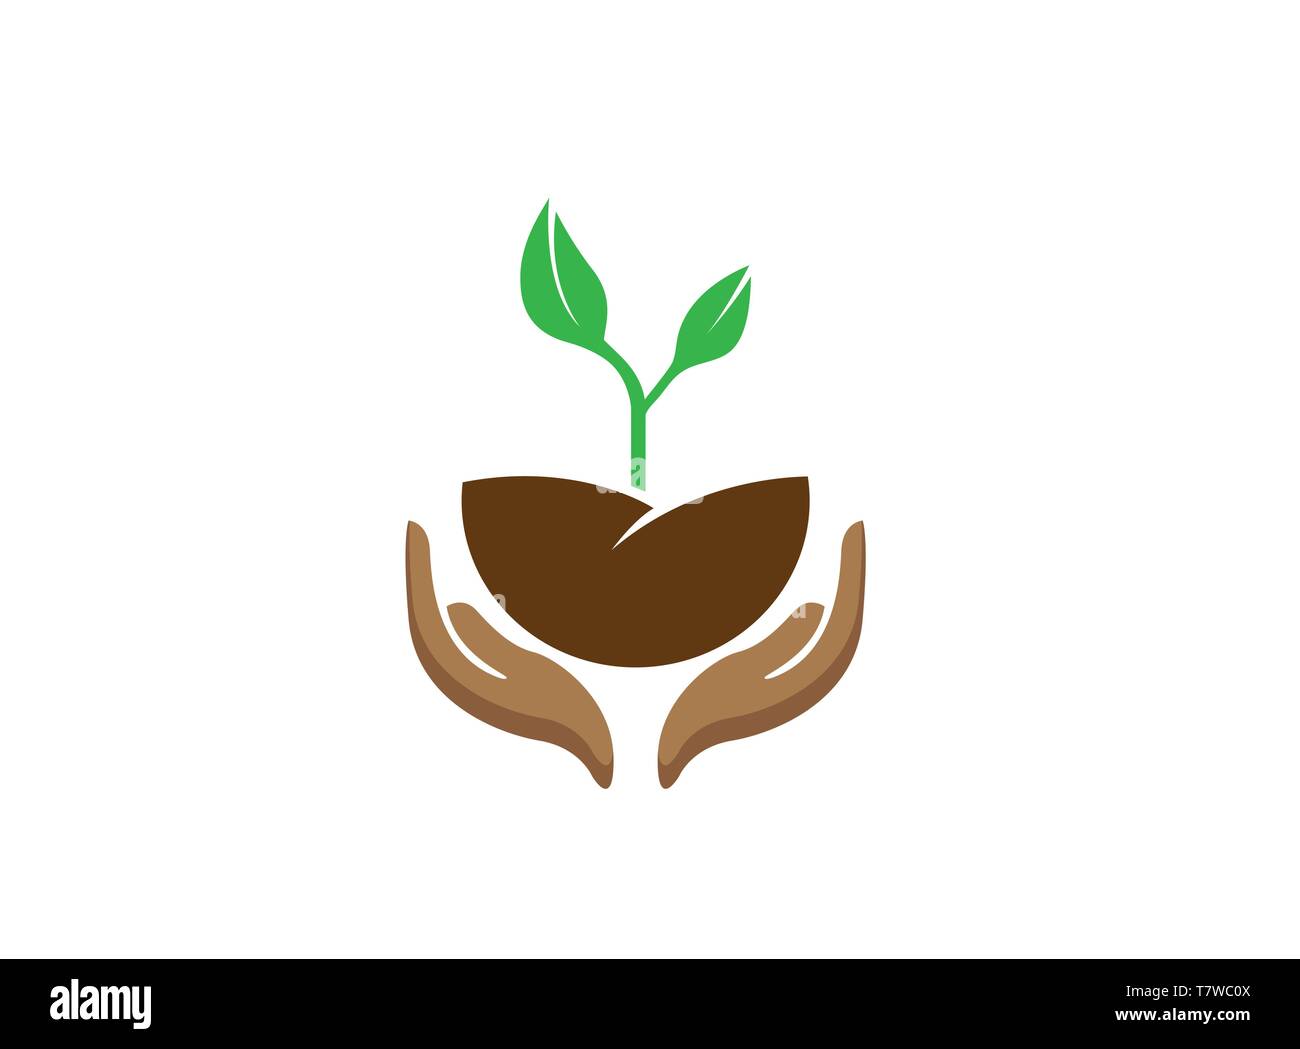 Hands that care for plants and nature logo design illustrator Stock Vector